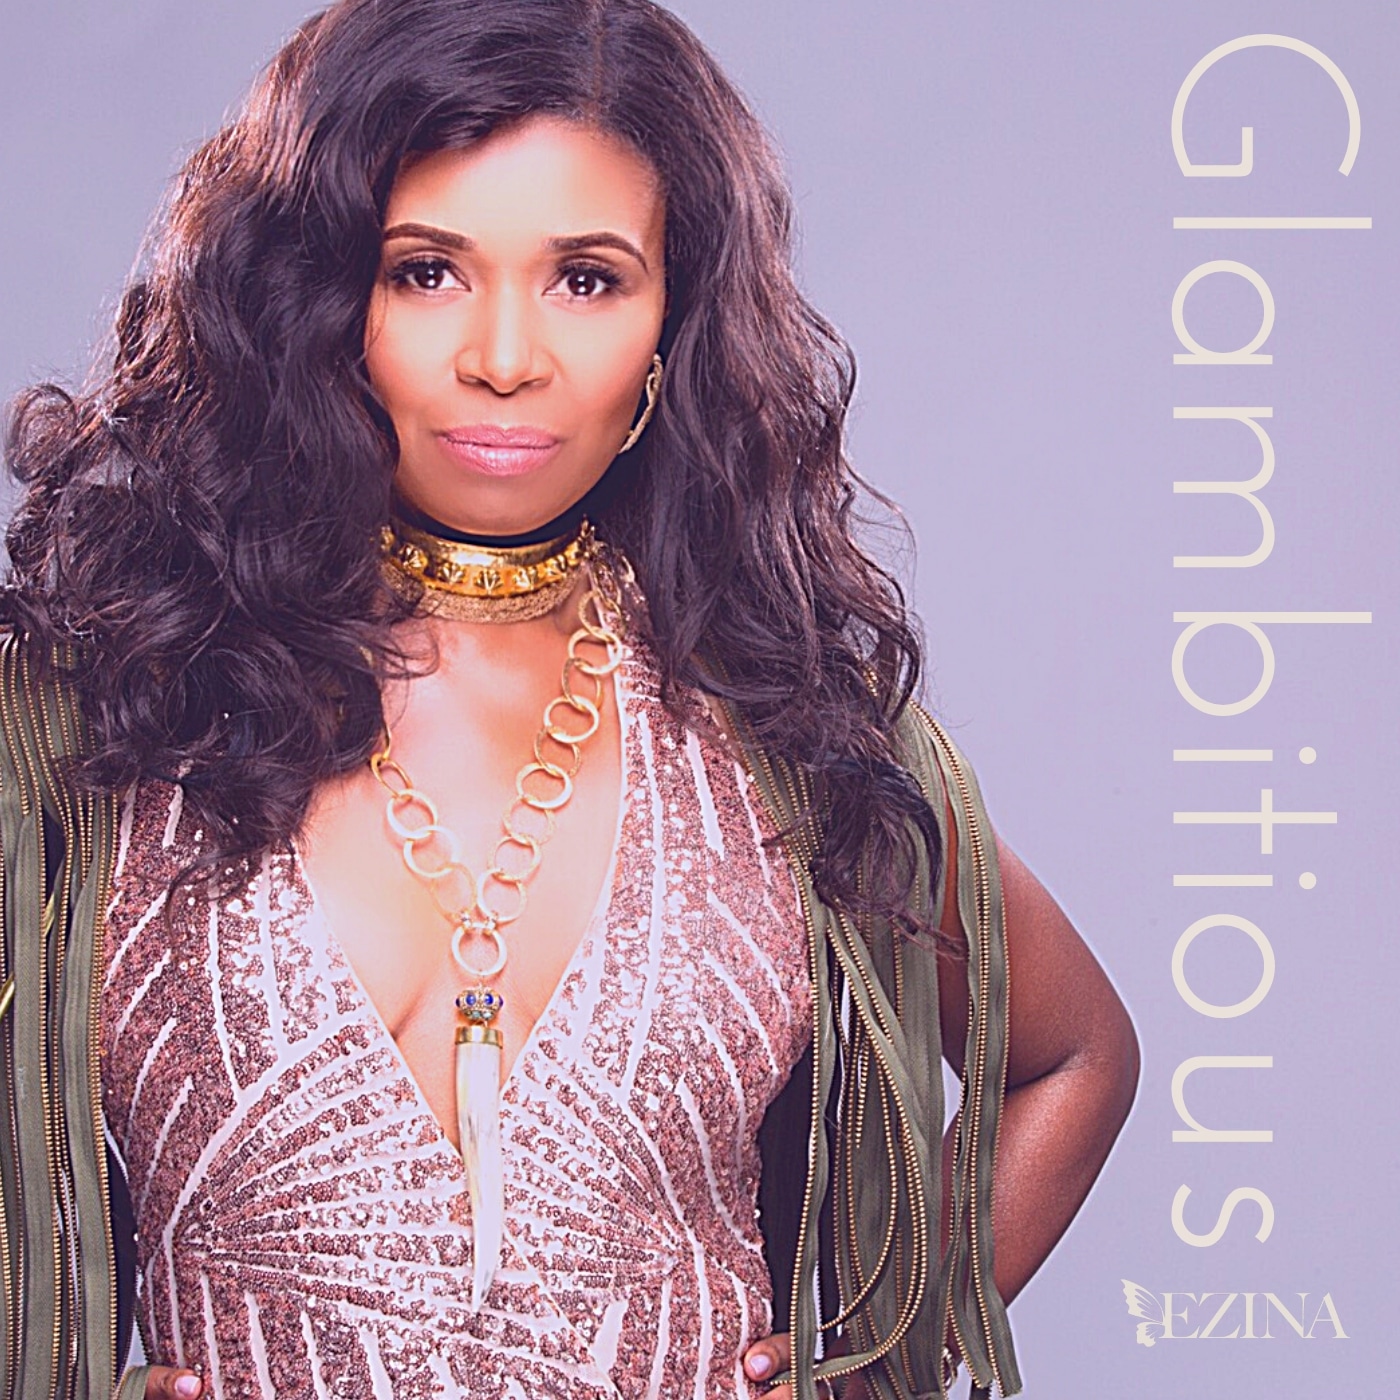 Glambitious CD Cover Final